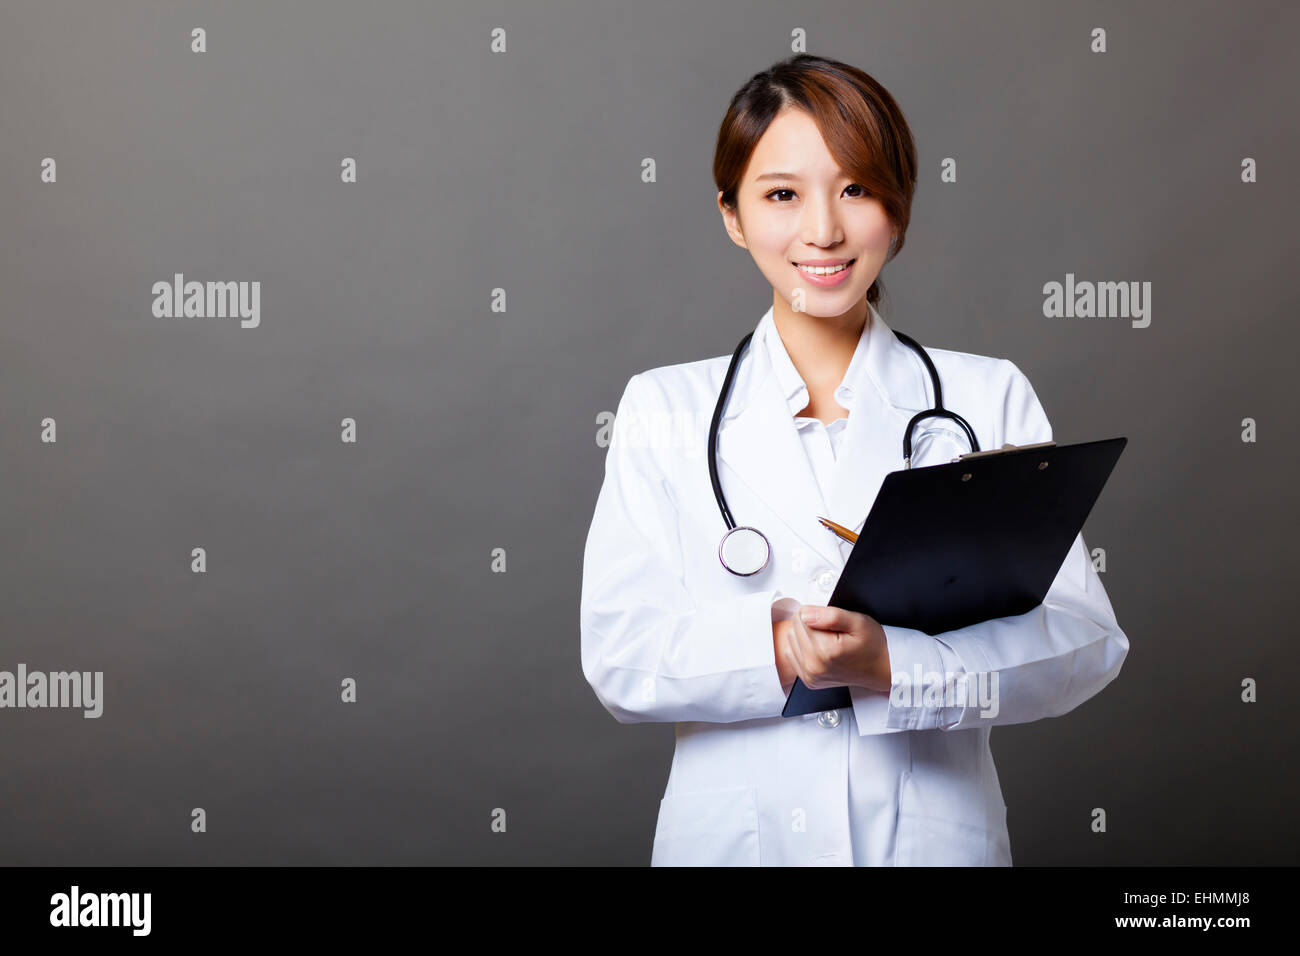 Smiling female doctor with clipboard Banque D'Images